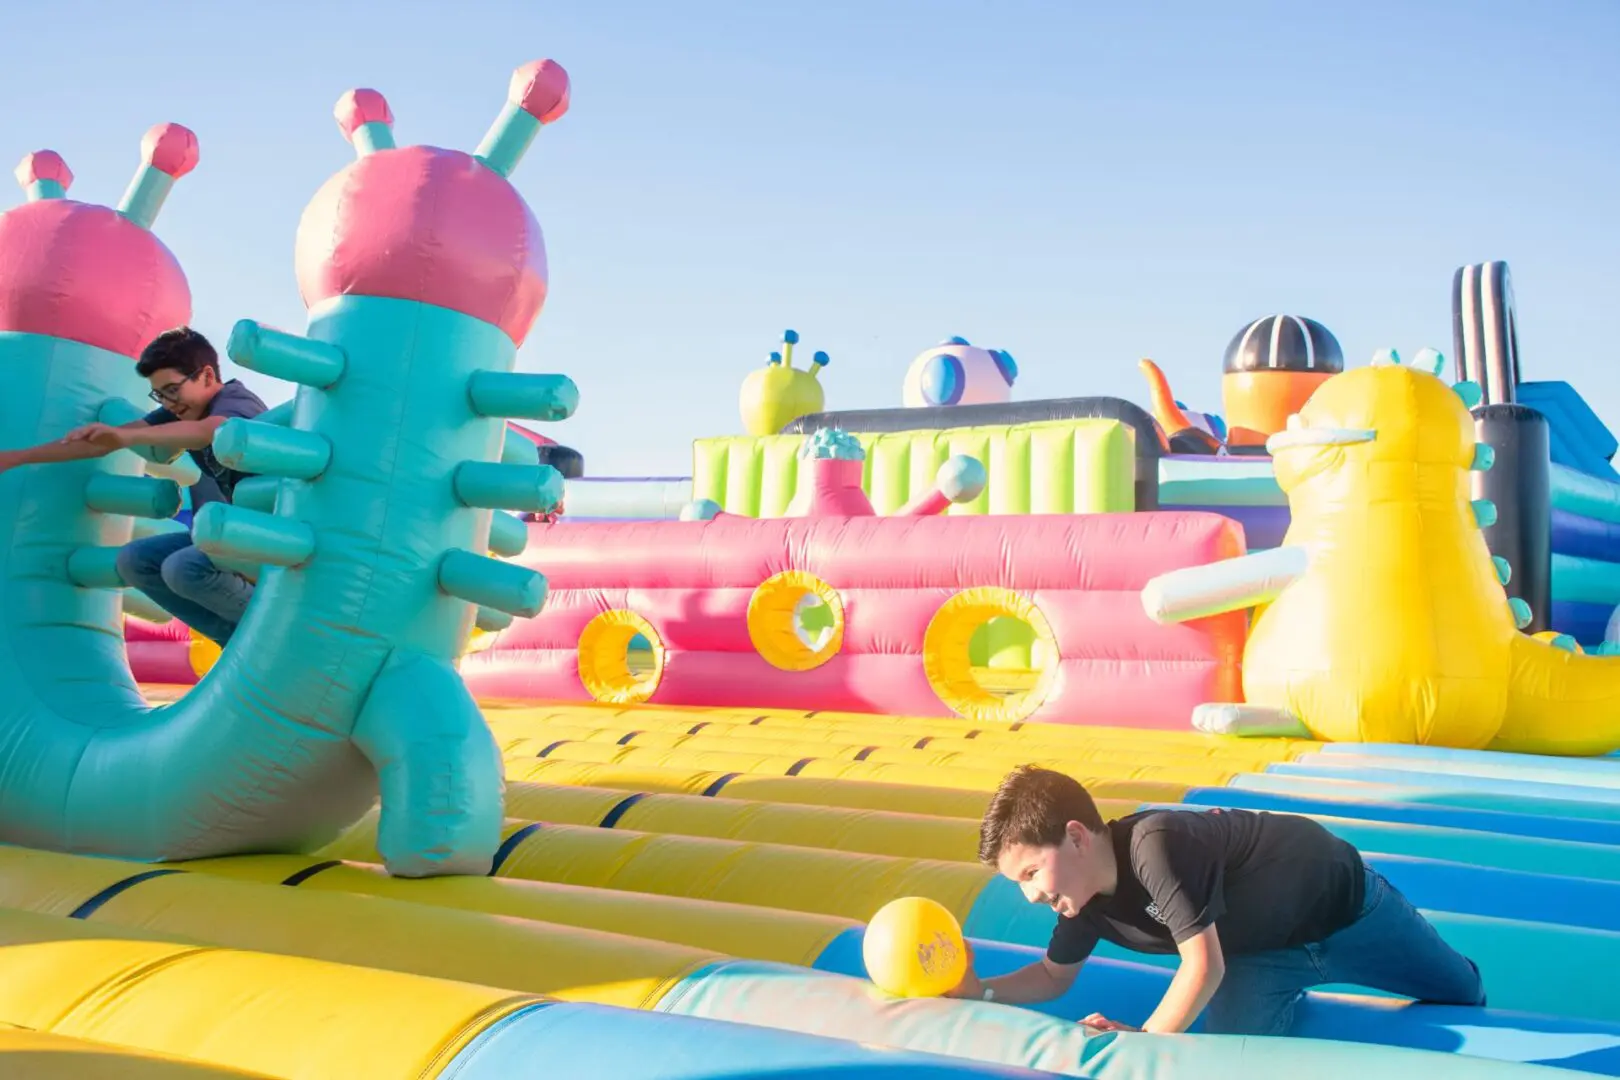 A person on an inflatable slide in the sun.